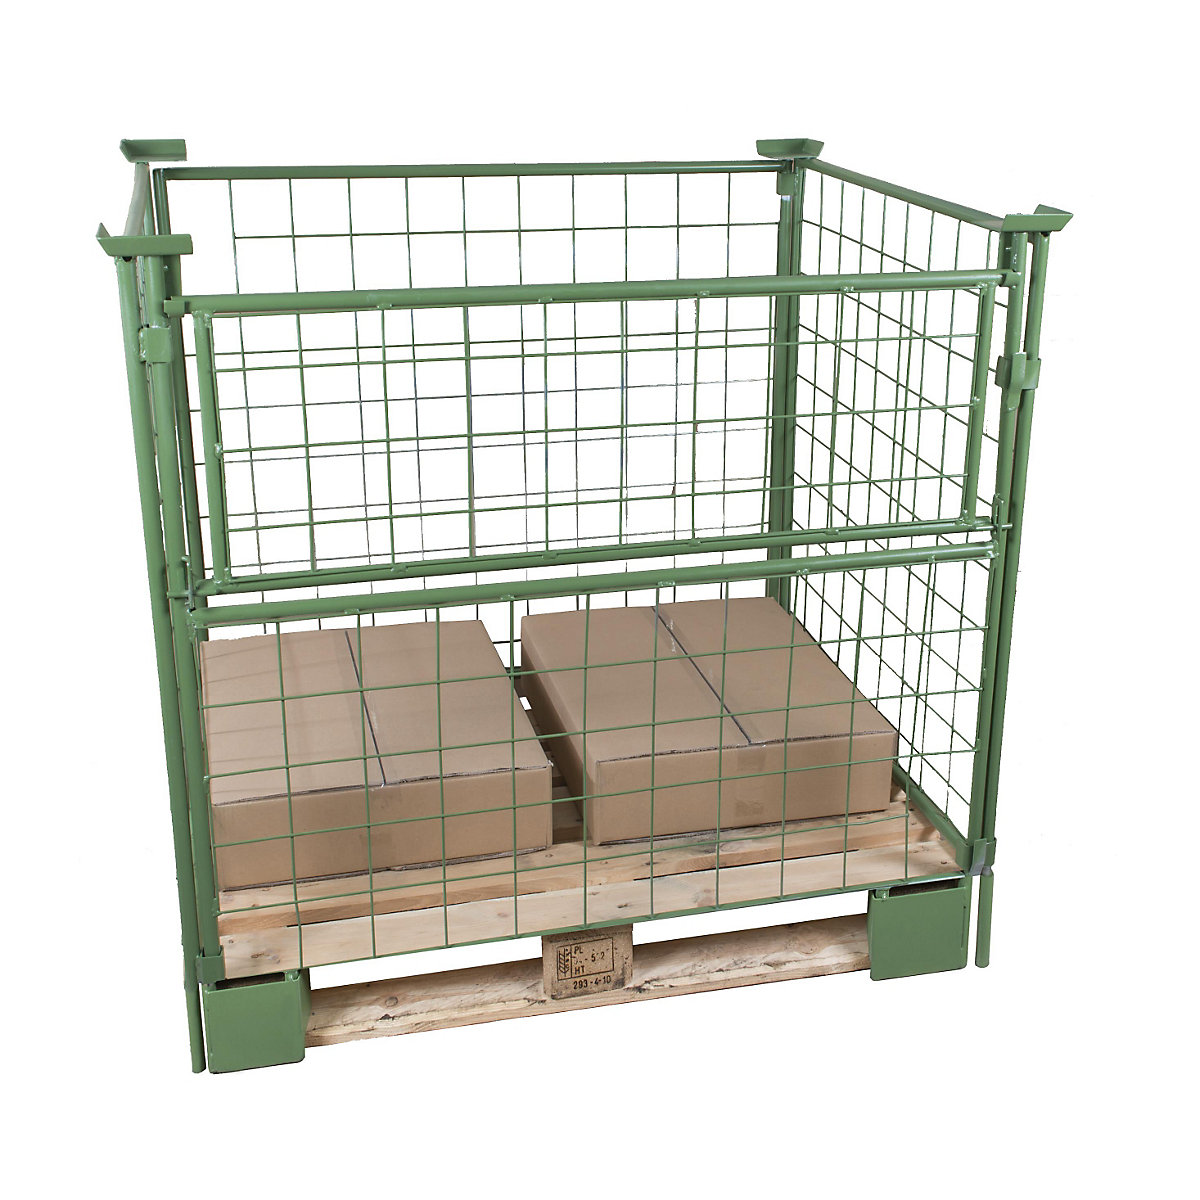 Pallet frame, effective height 1200 mm, for stacking, WxL 800 x 1200 mm, 1 long side can be half folded-2